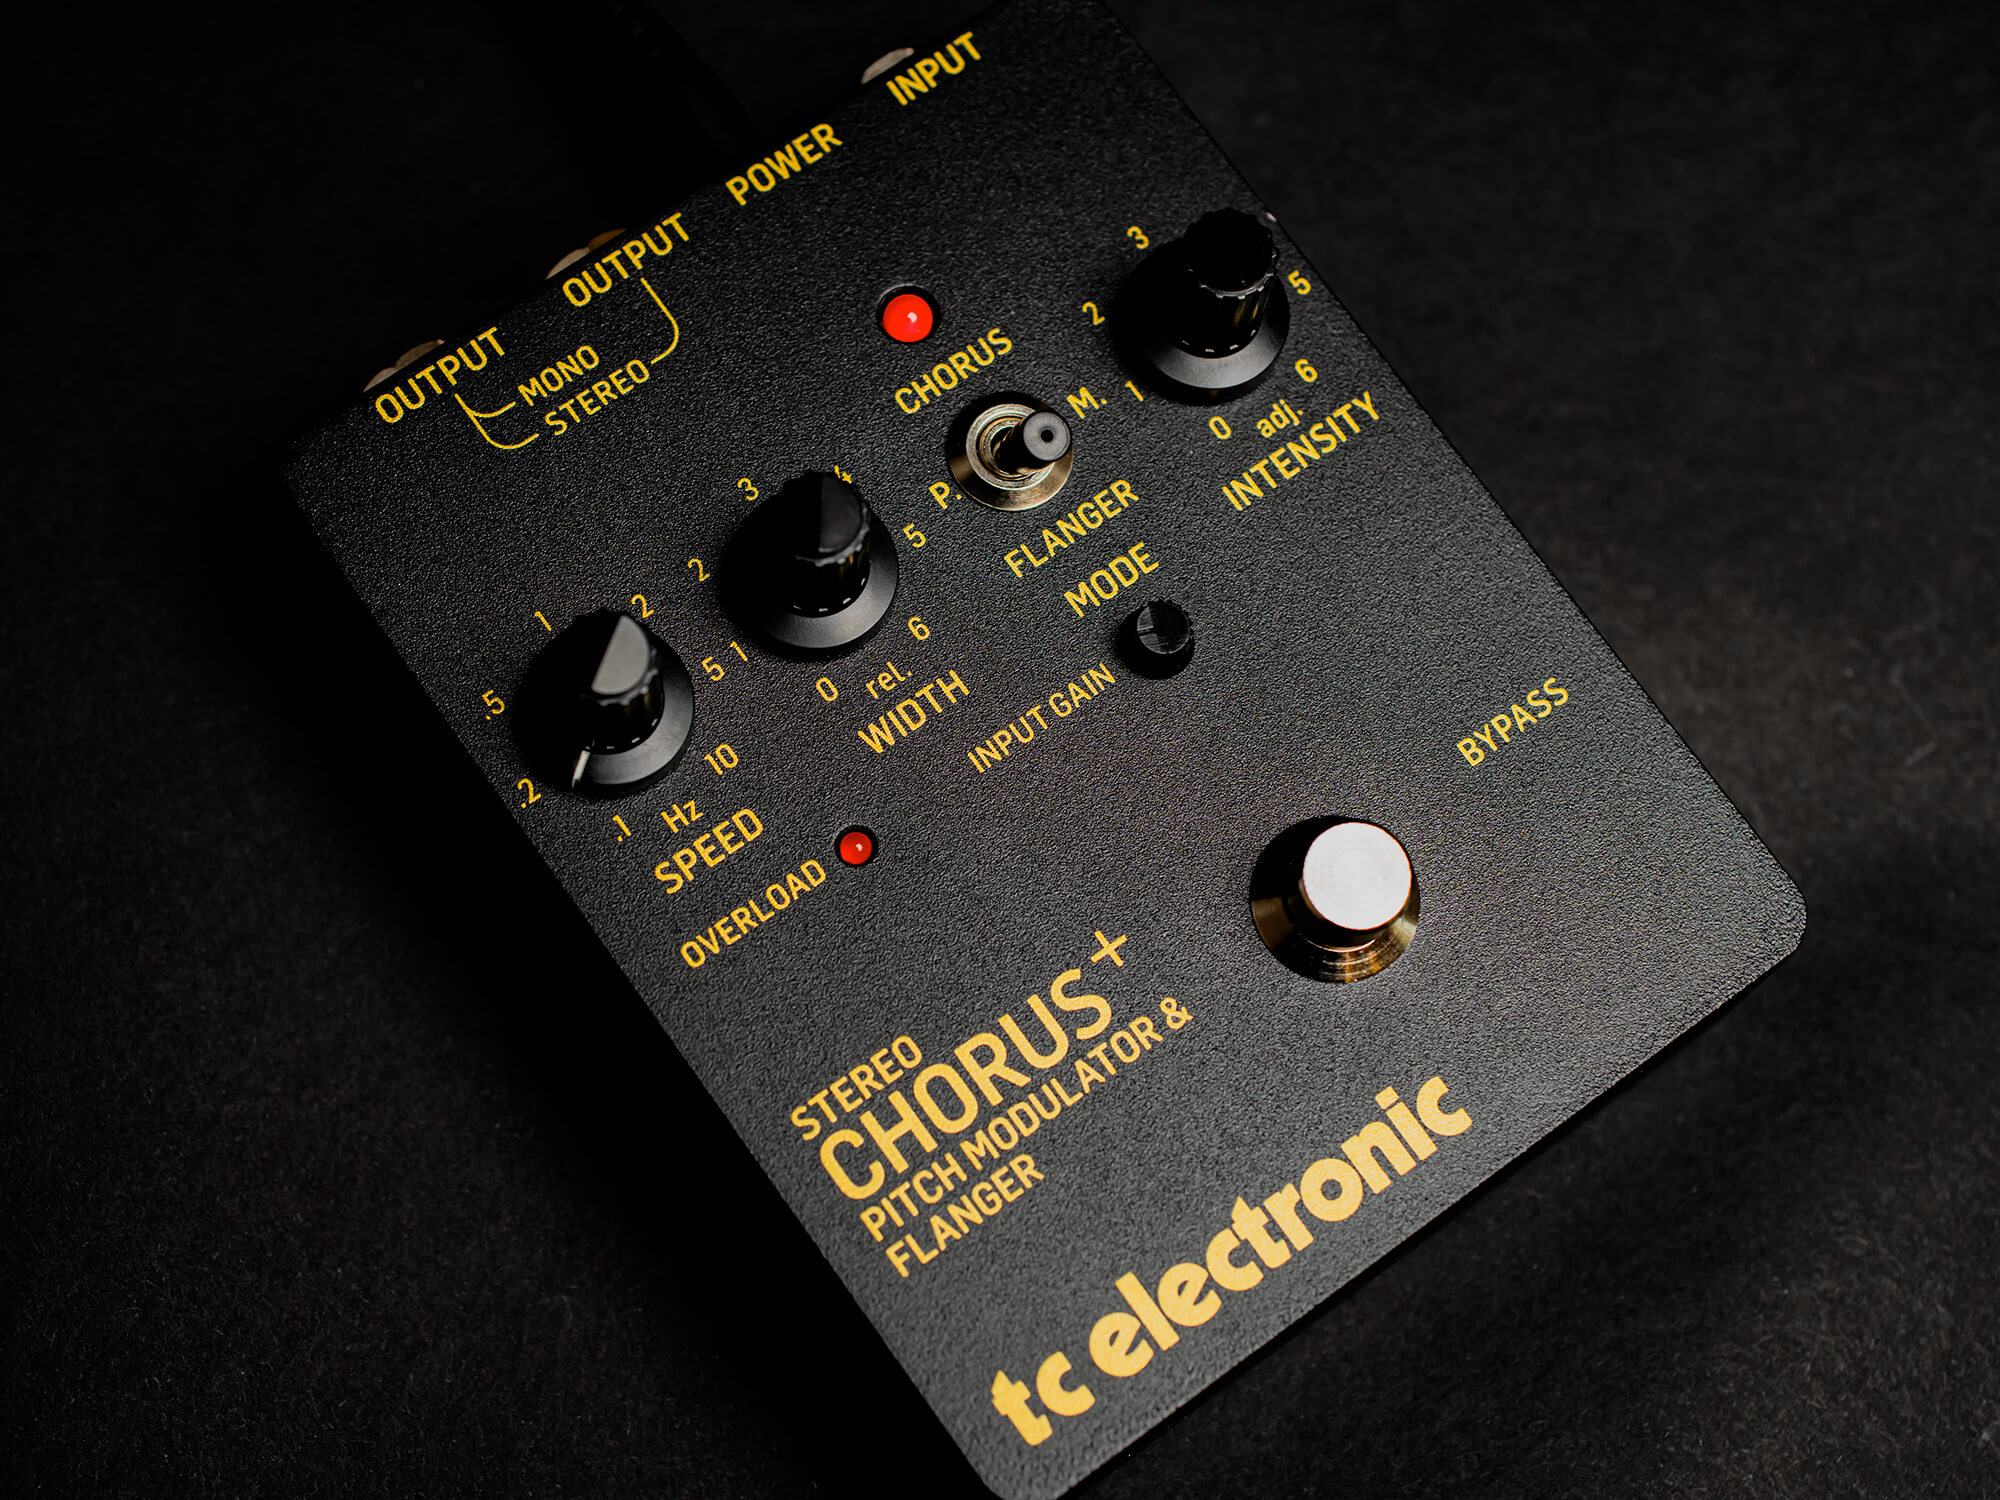 The TC Electronic Stereo Chorus Flanger